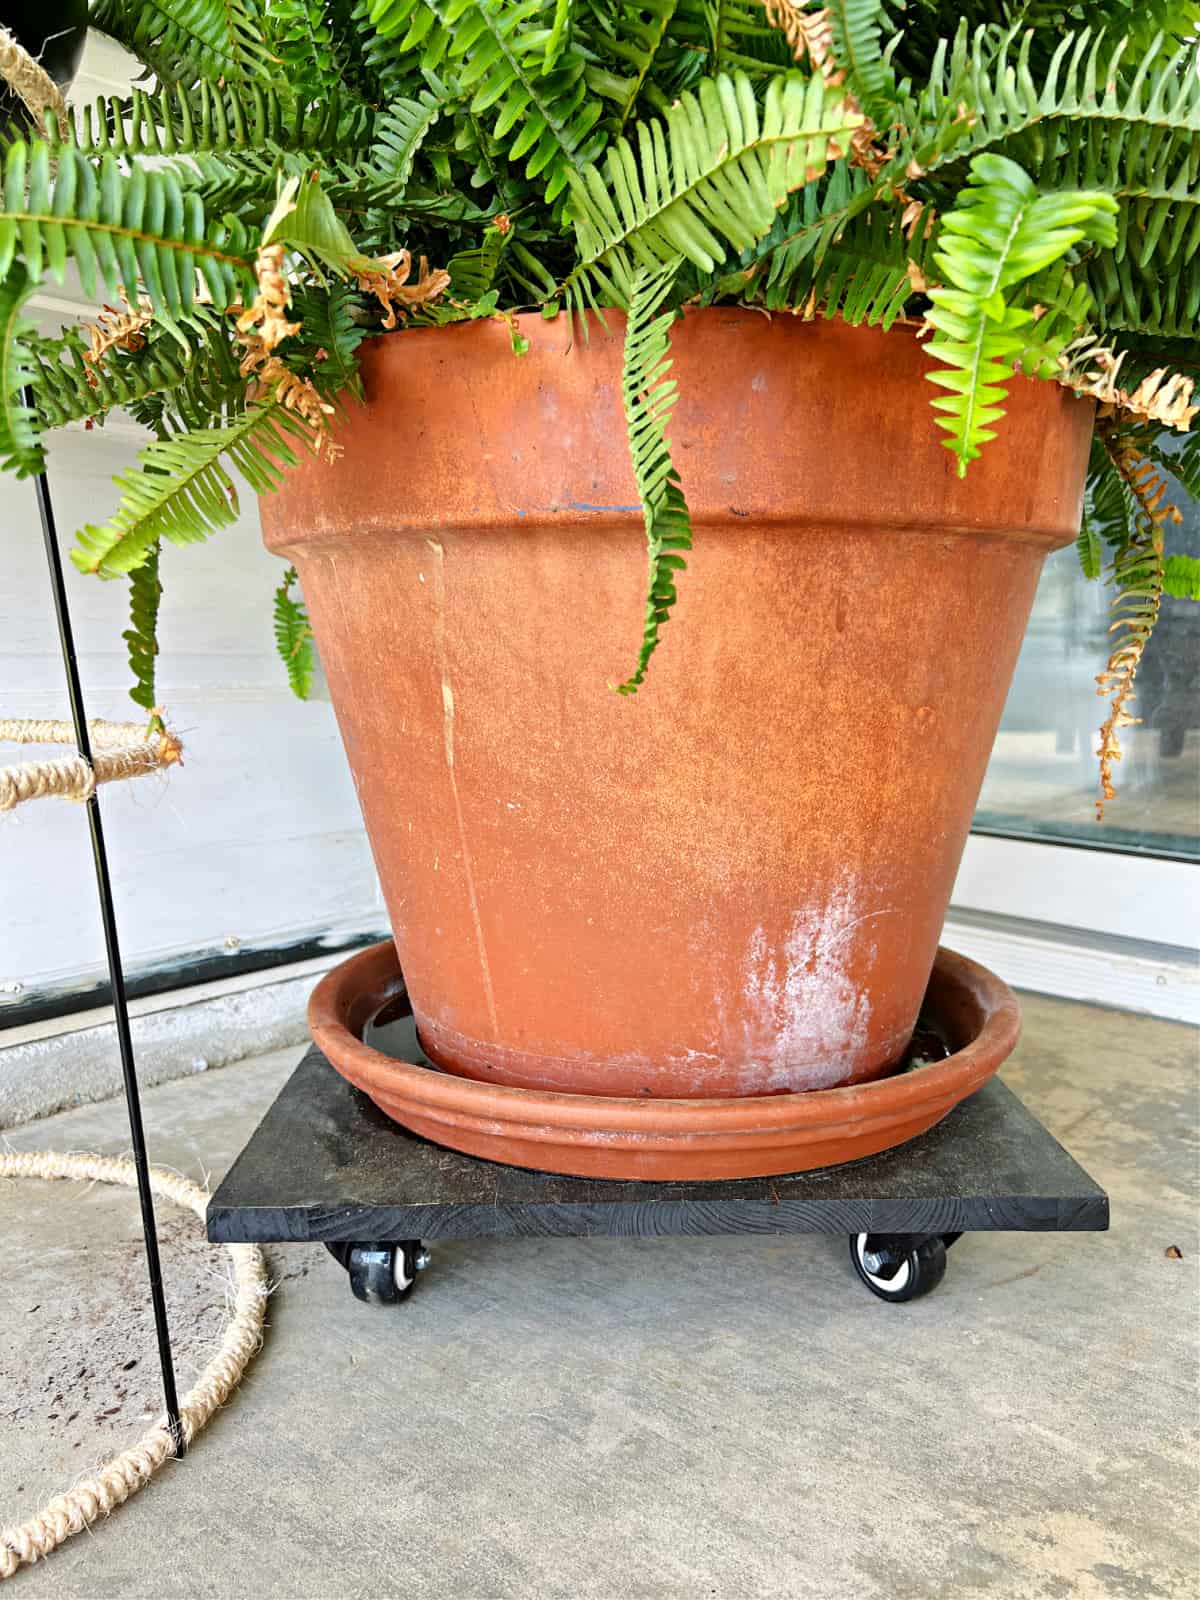 plant sitting on DIY rolling plant stand